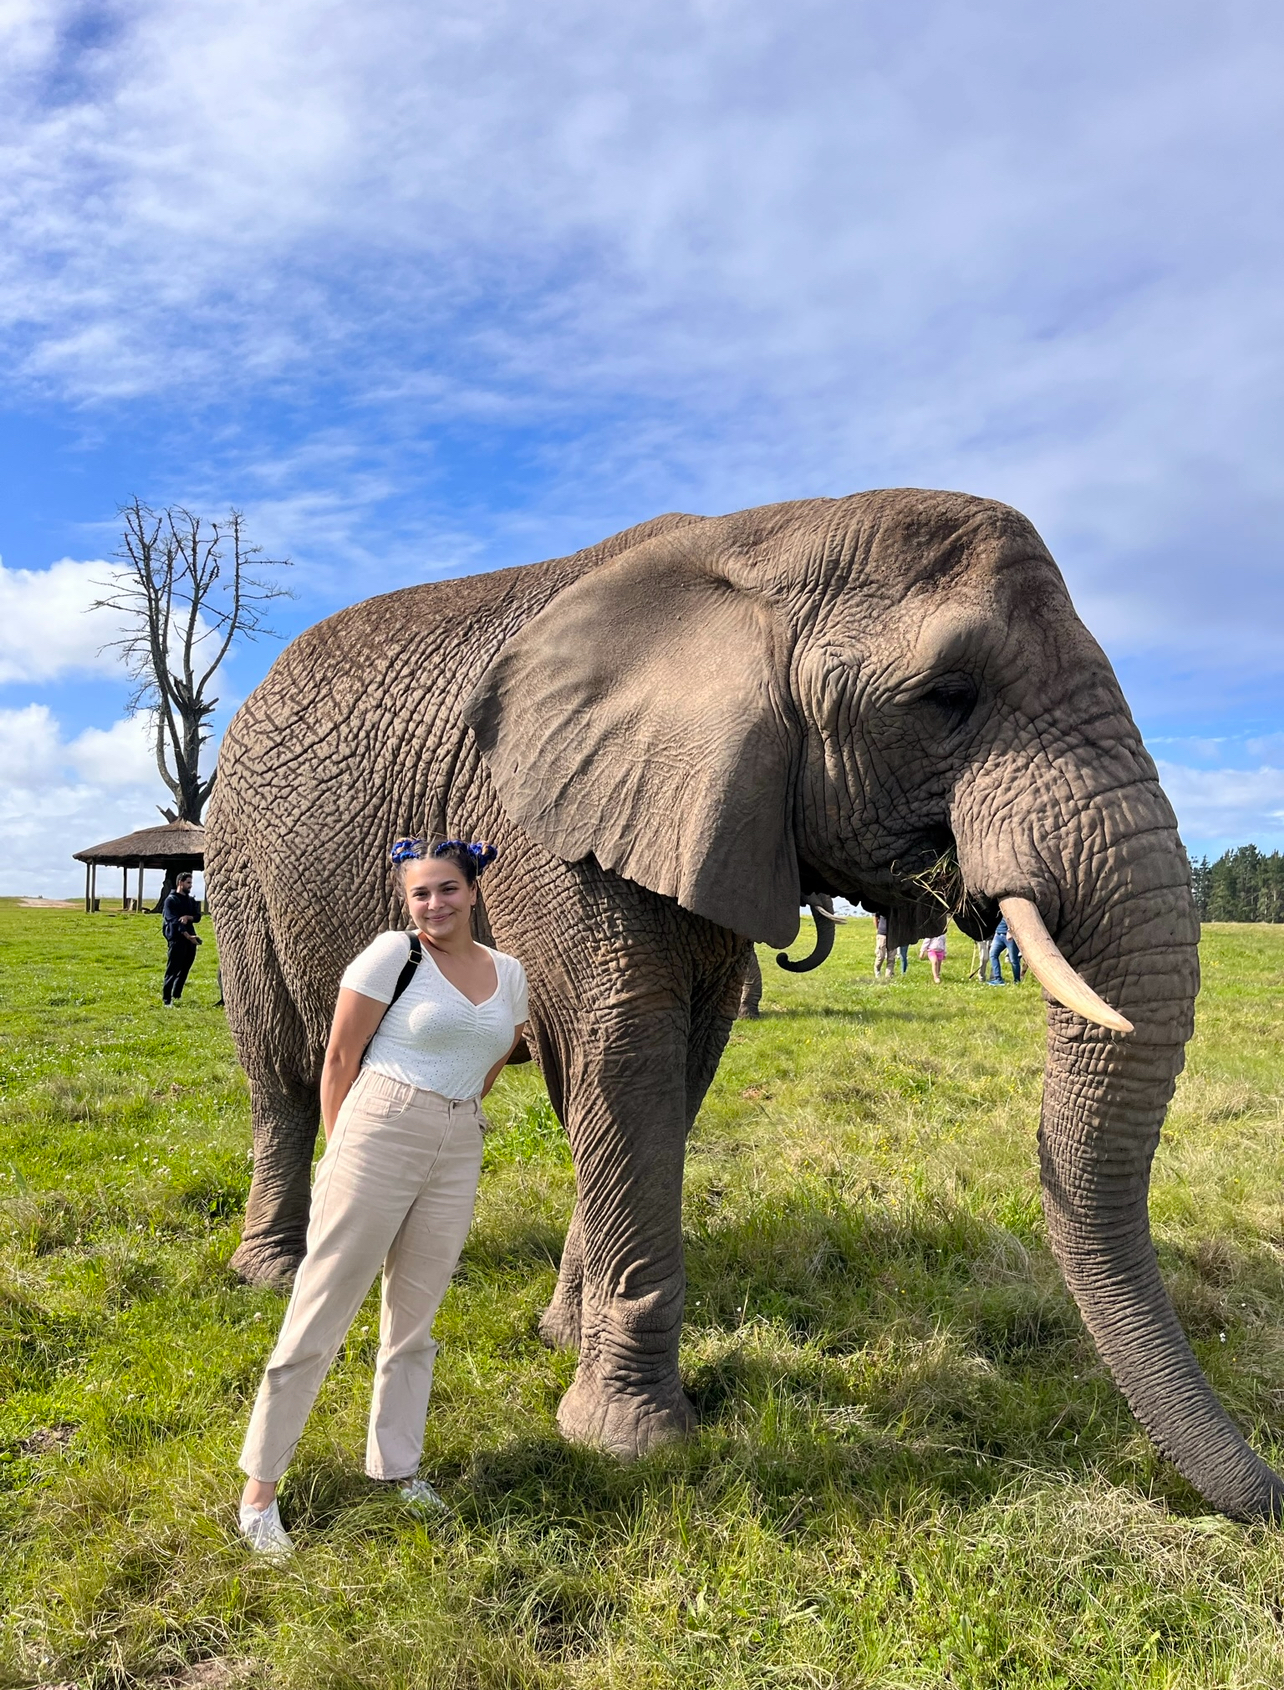 Meeting some elephants up close in Garden Route, South Africa!